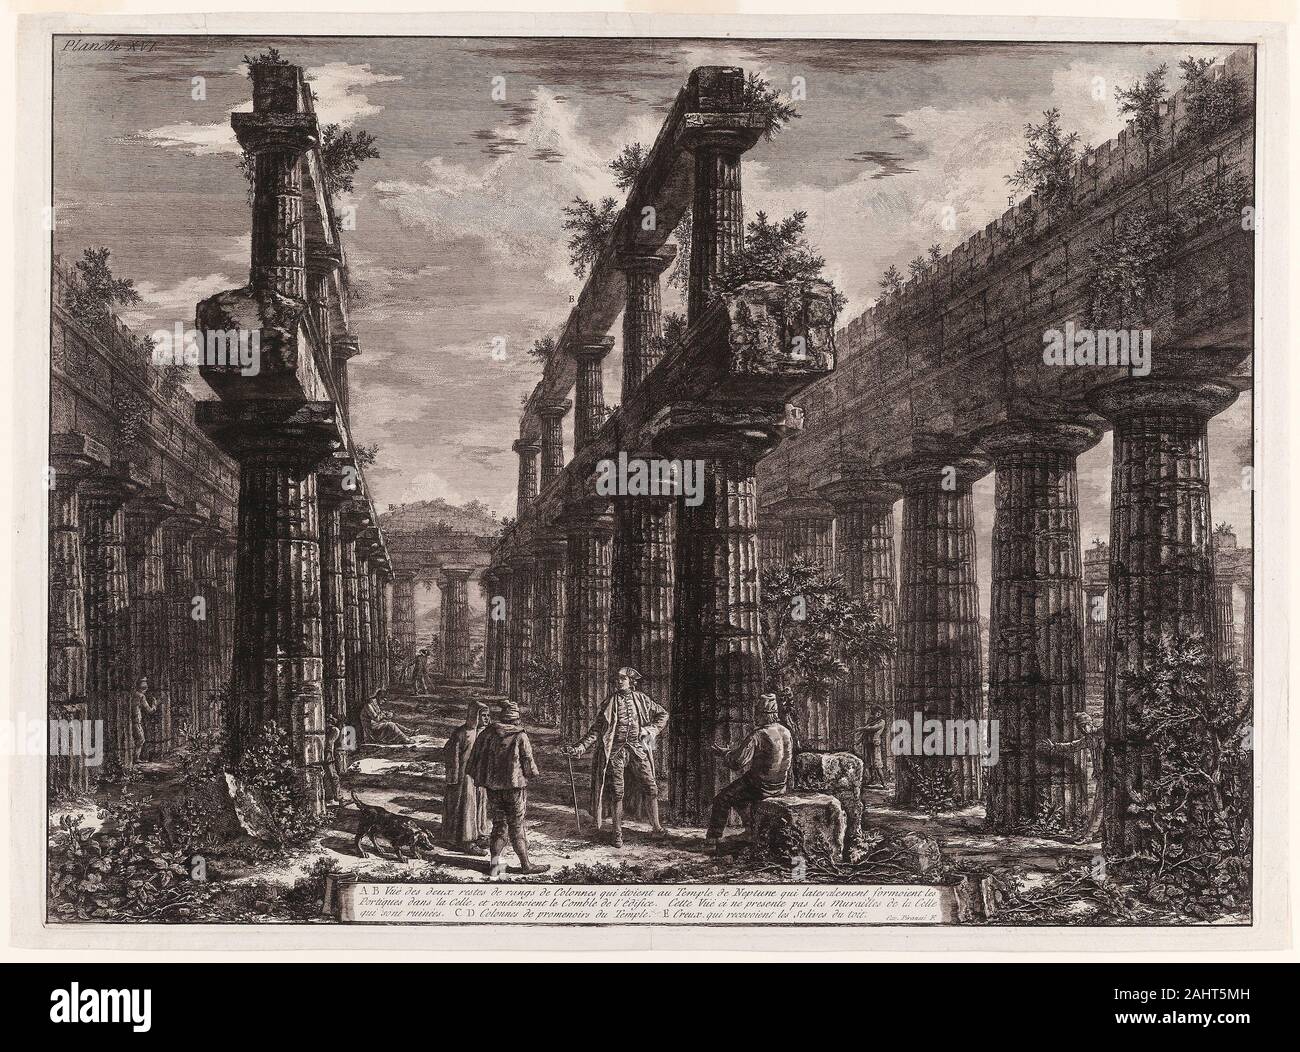 Giovanni Battista Piranesi. A., B. View of the remains of the two rows of columns in the Temple of Neptune which originally formed the colonnades along the sides of the cella, and supported the uppermost part of the roof, from Different views of Paestum. 1778. Italy. Etching on ivory laid paper Stock Photo